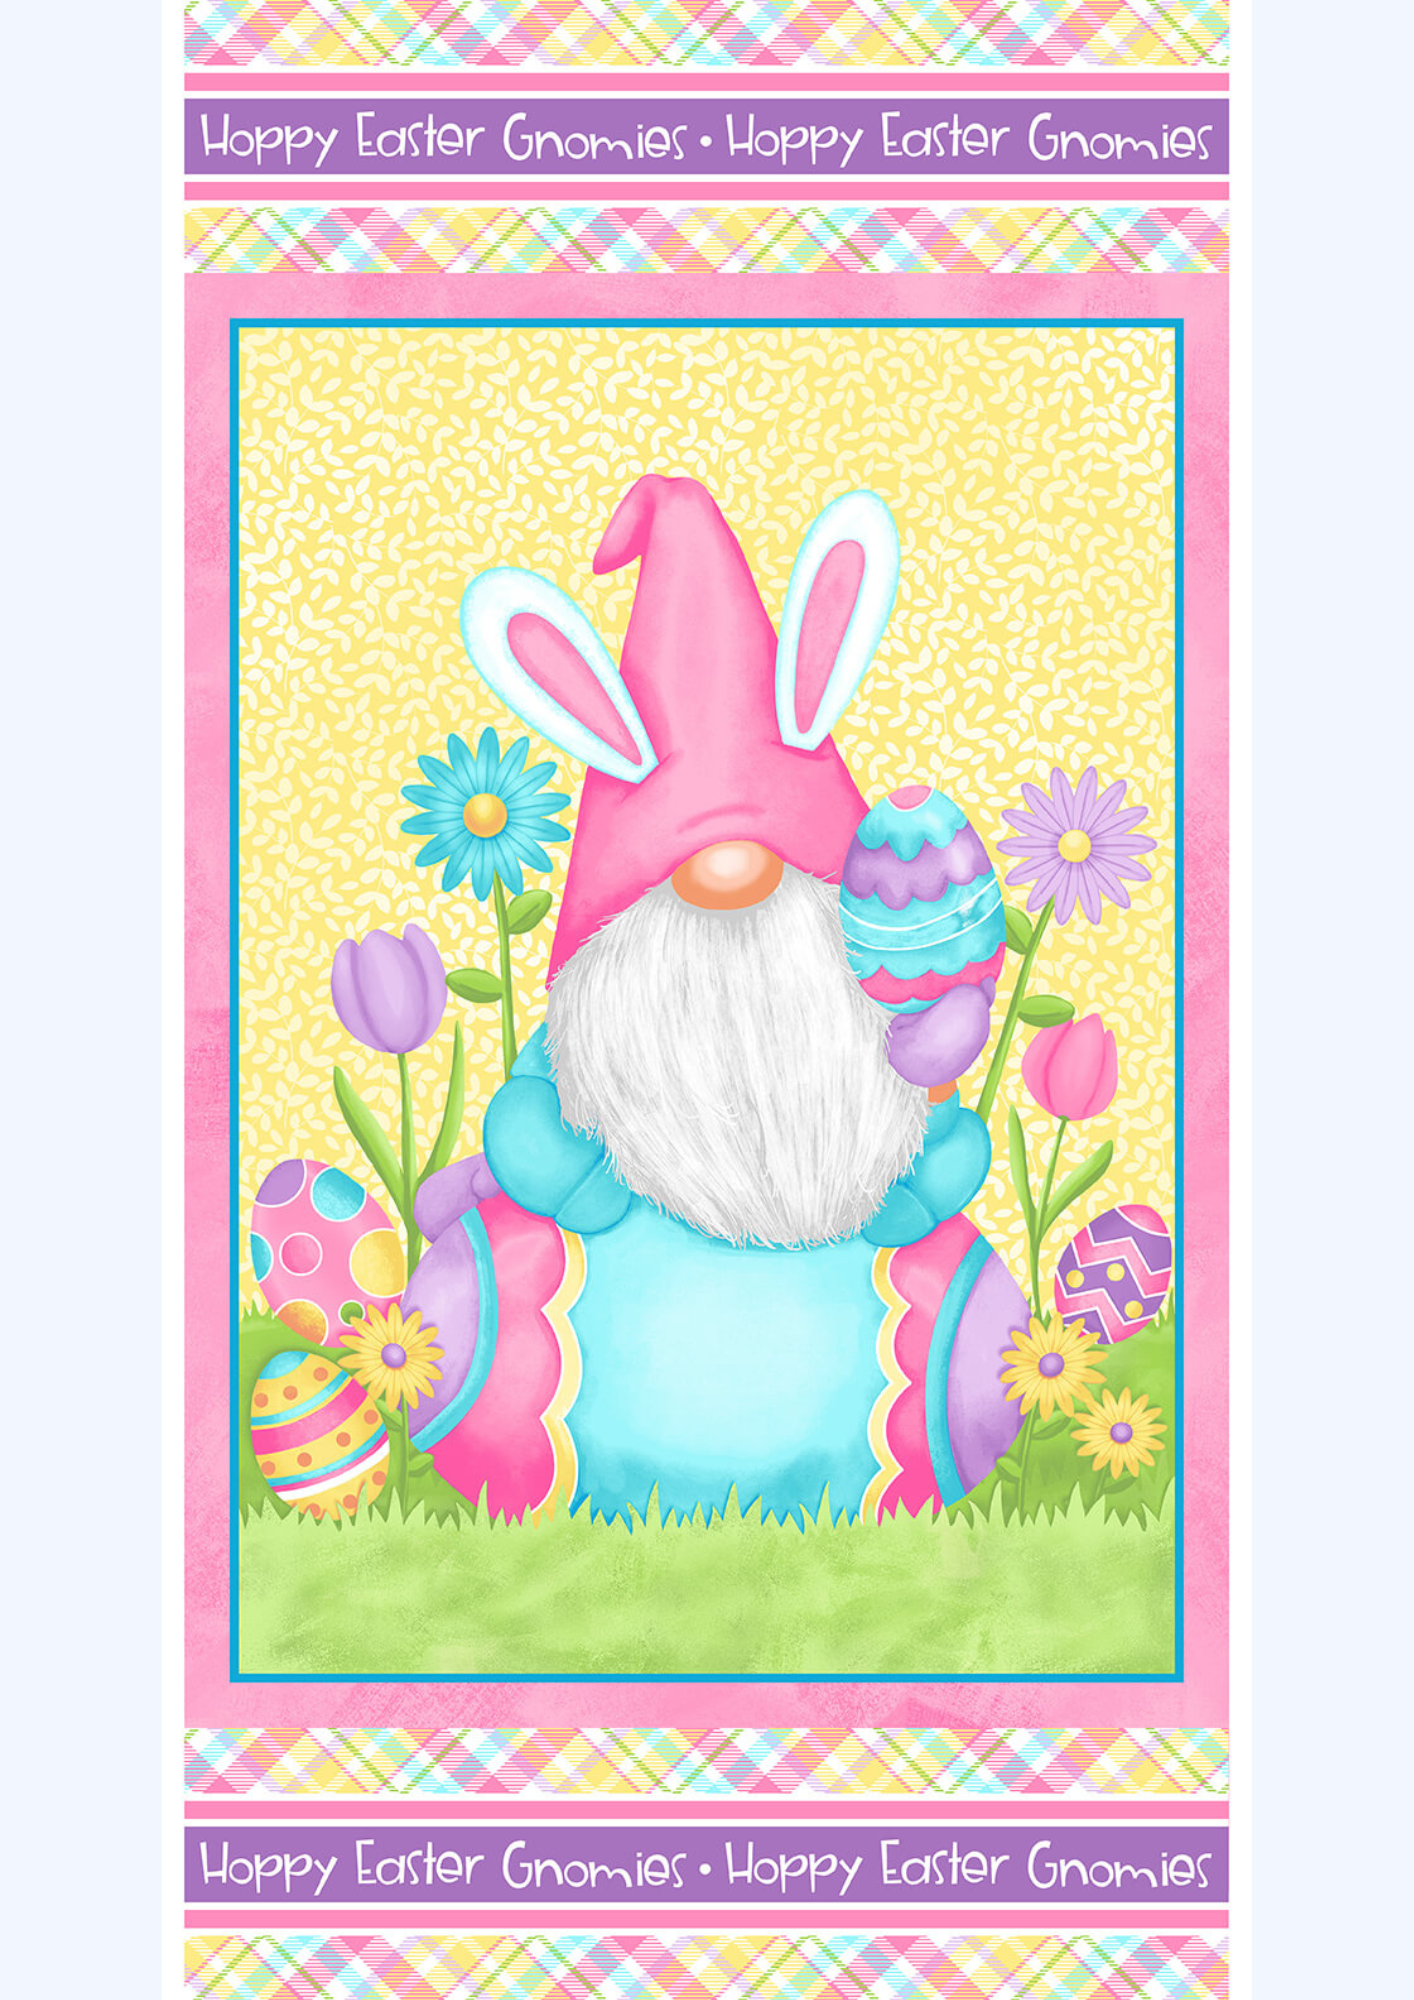 Henry Glass Quilt Kit Hoppy Easter Gnomies Easy DIY Beginner QUILT KIT with Henry Glass Fabric and Picture This Pattern by Jude Spero